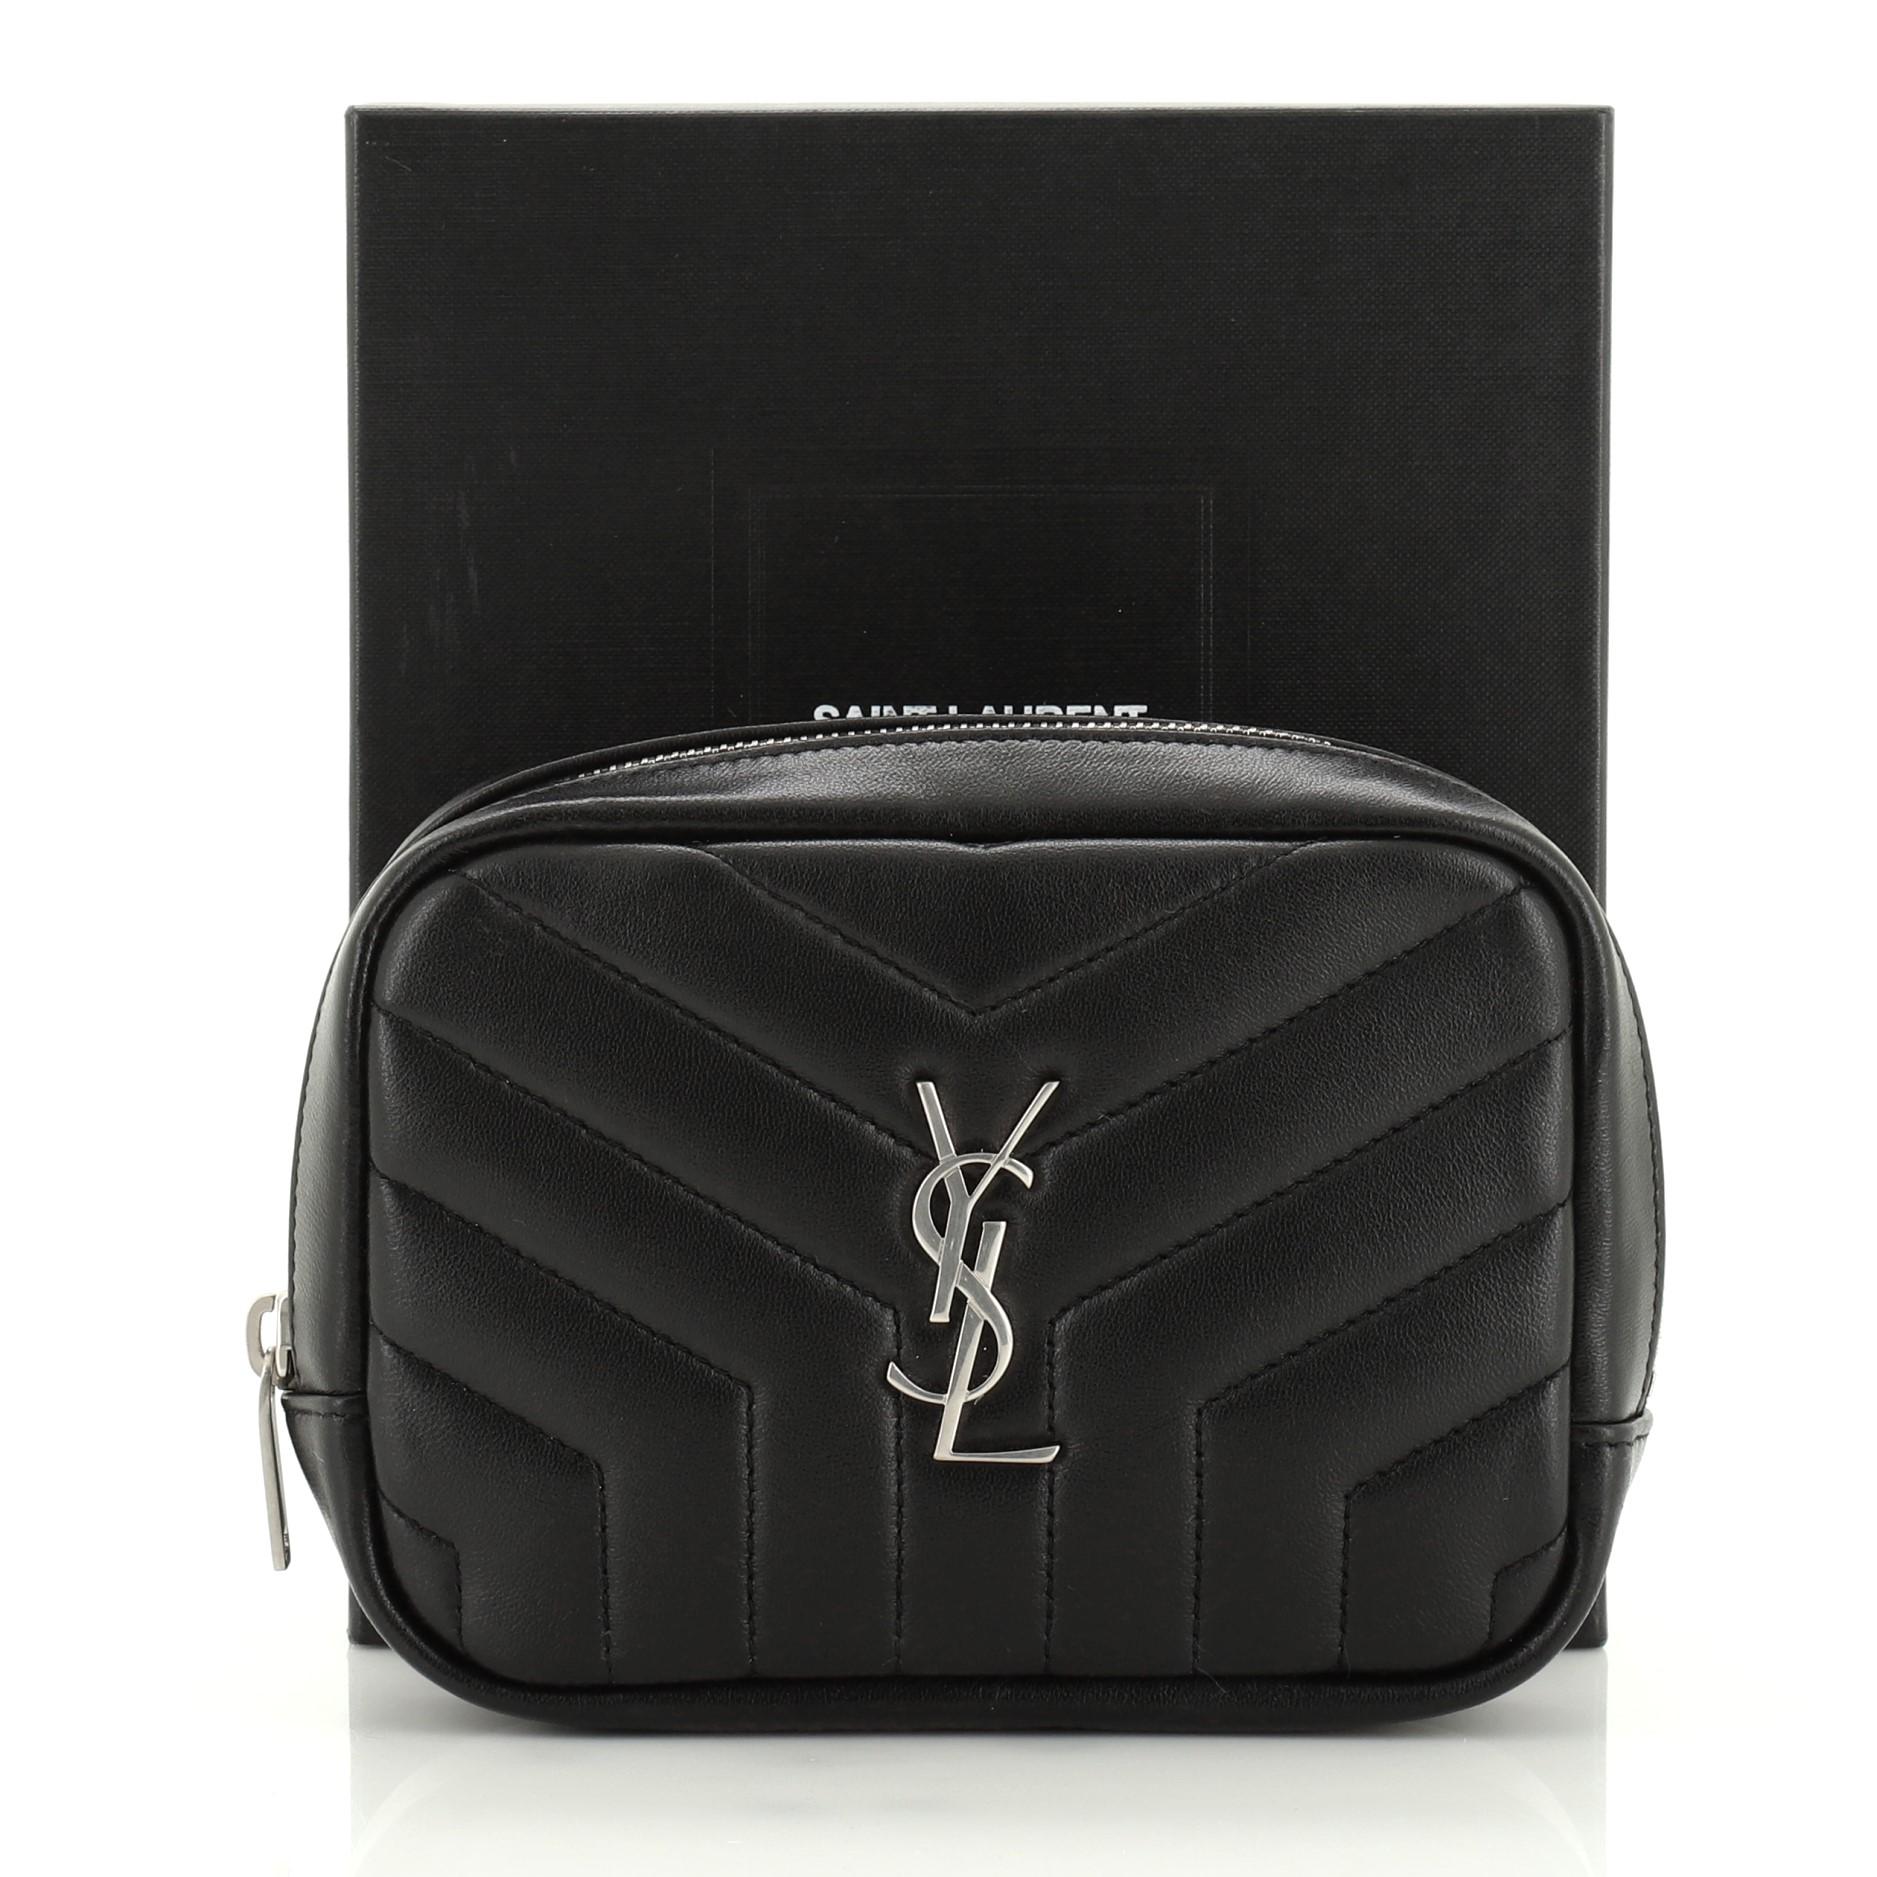 This Saint Laurent Loulou Cosmetic Case Matelasse Chevron Leather, crafted in black matelasse chevron leather, features YSL metal logo and silver-tone hardware. Its zip closure opens to a black fabric interior. 

Condition: Excellent. Minimal wear